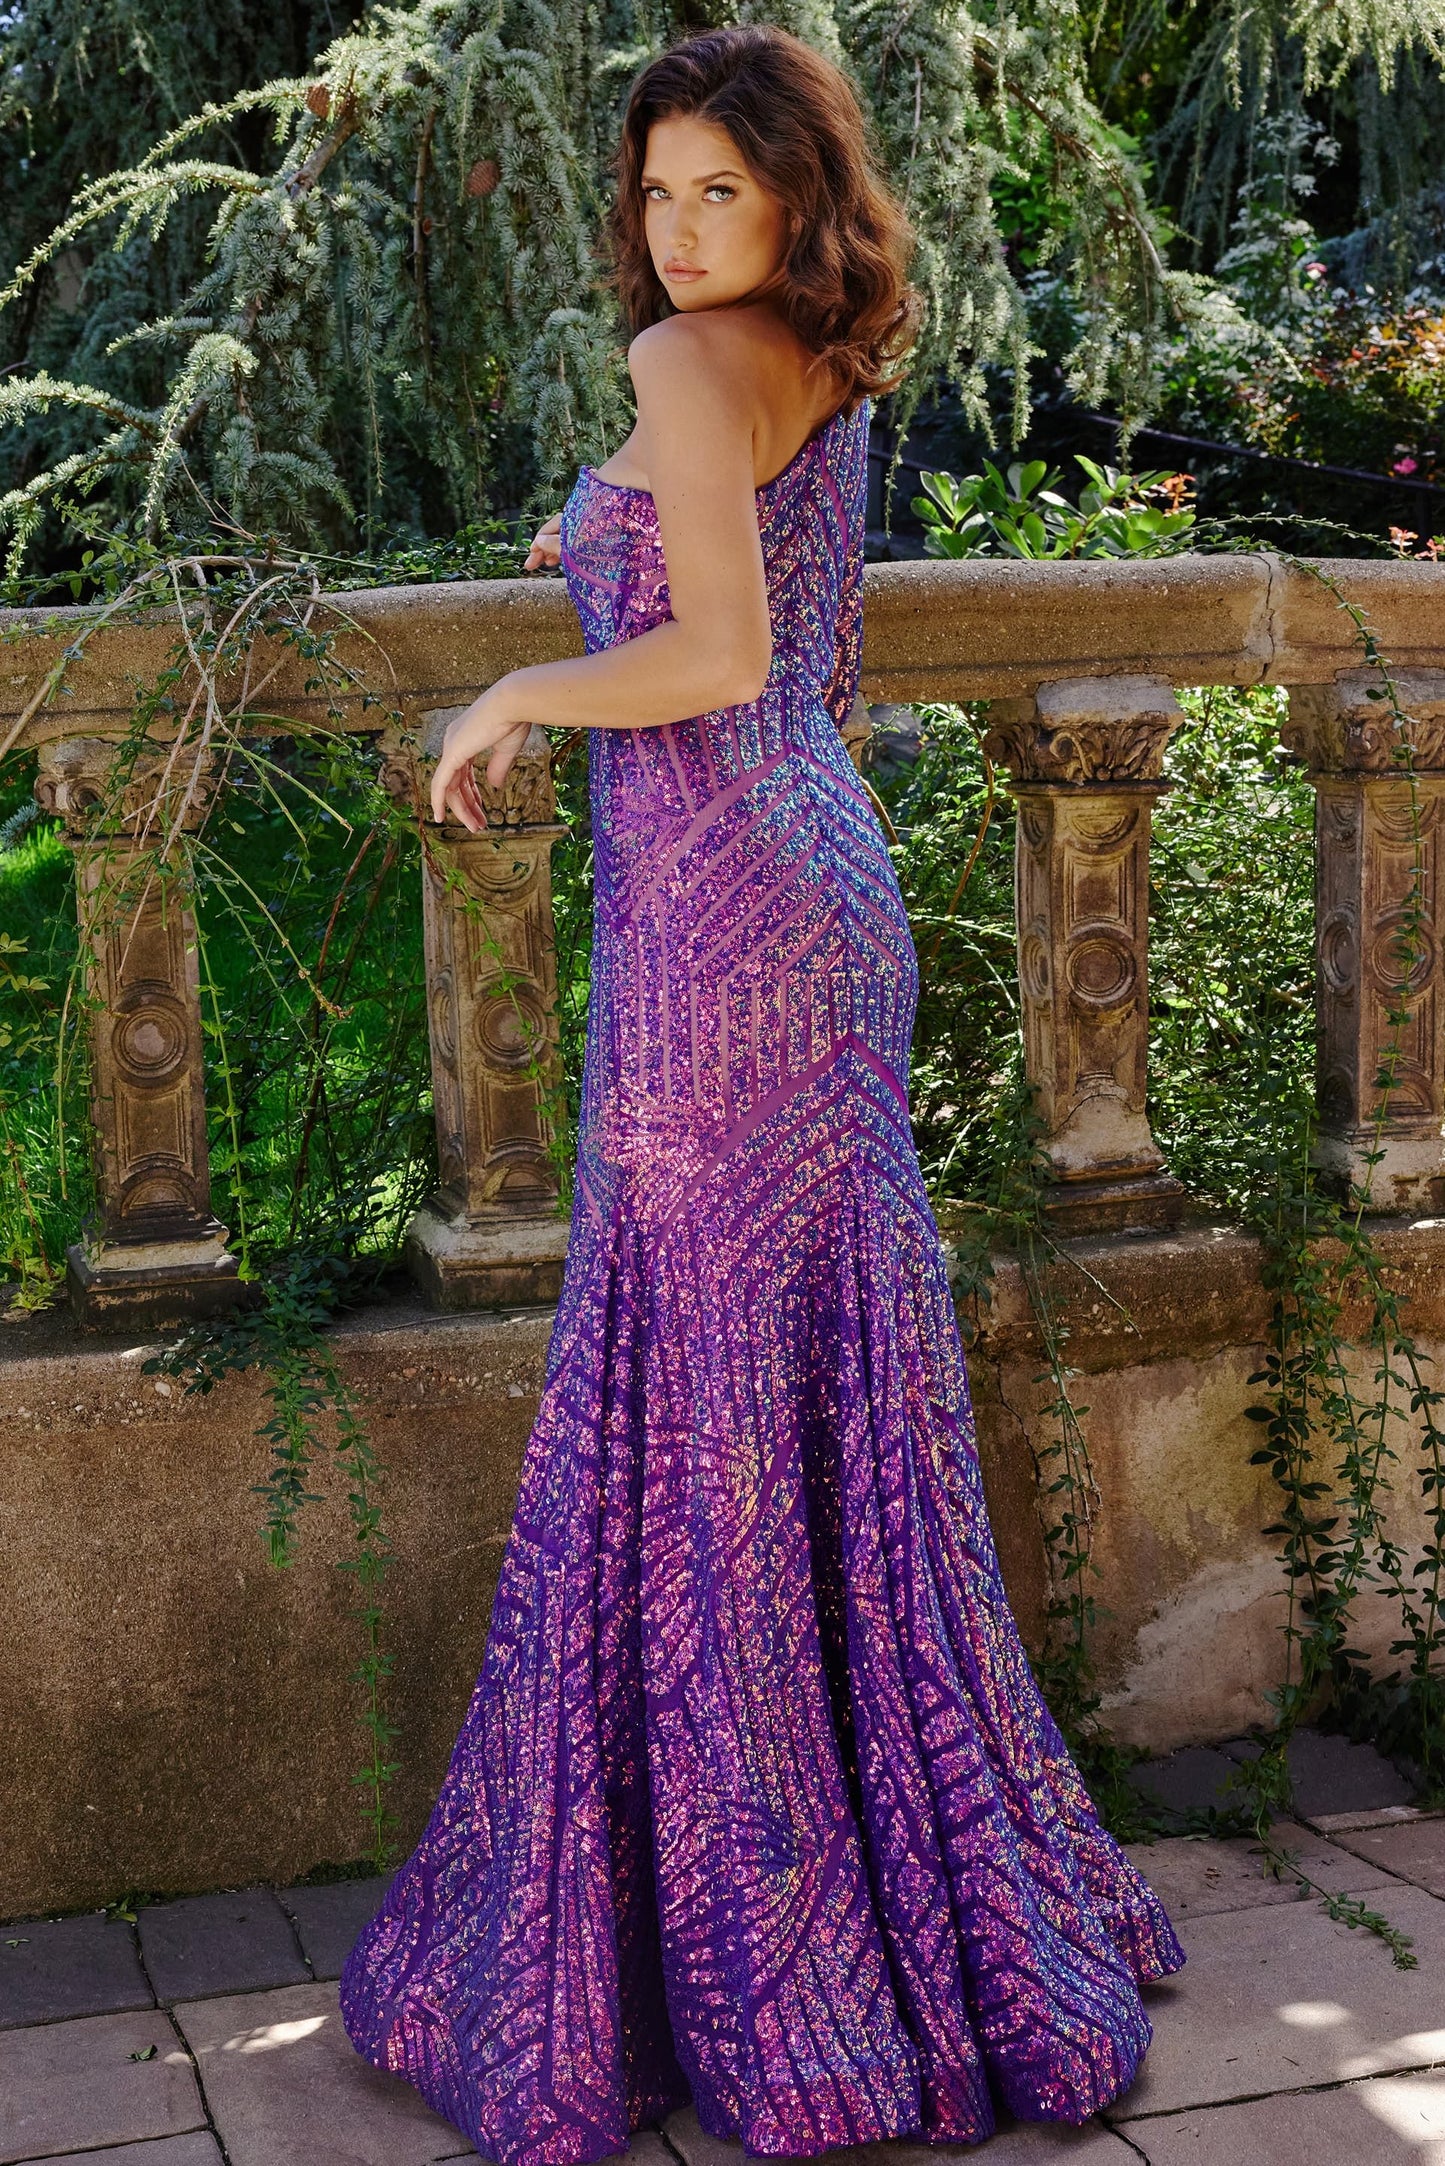 Jovani 24098 One Shoulder Long Sleeve Fitted Sequin Mermaid Prom Dress Pageant Gown Jovani 24098 is the perfect choice for a special occasion. It features a one-shoulder neckline, long sleeves, and a mermaid silhouette adorned with fantasy sequins. This fitted gown is designed to flatter, making you look and feel amazing.  Sizes: 00-24  Colors: EMERALD, IREDENSCNT BLUE, IRIDESCENT VIOLET, NEON HOTPINK, PEACOCK